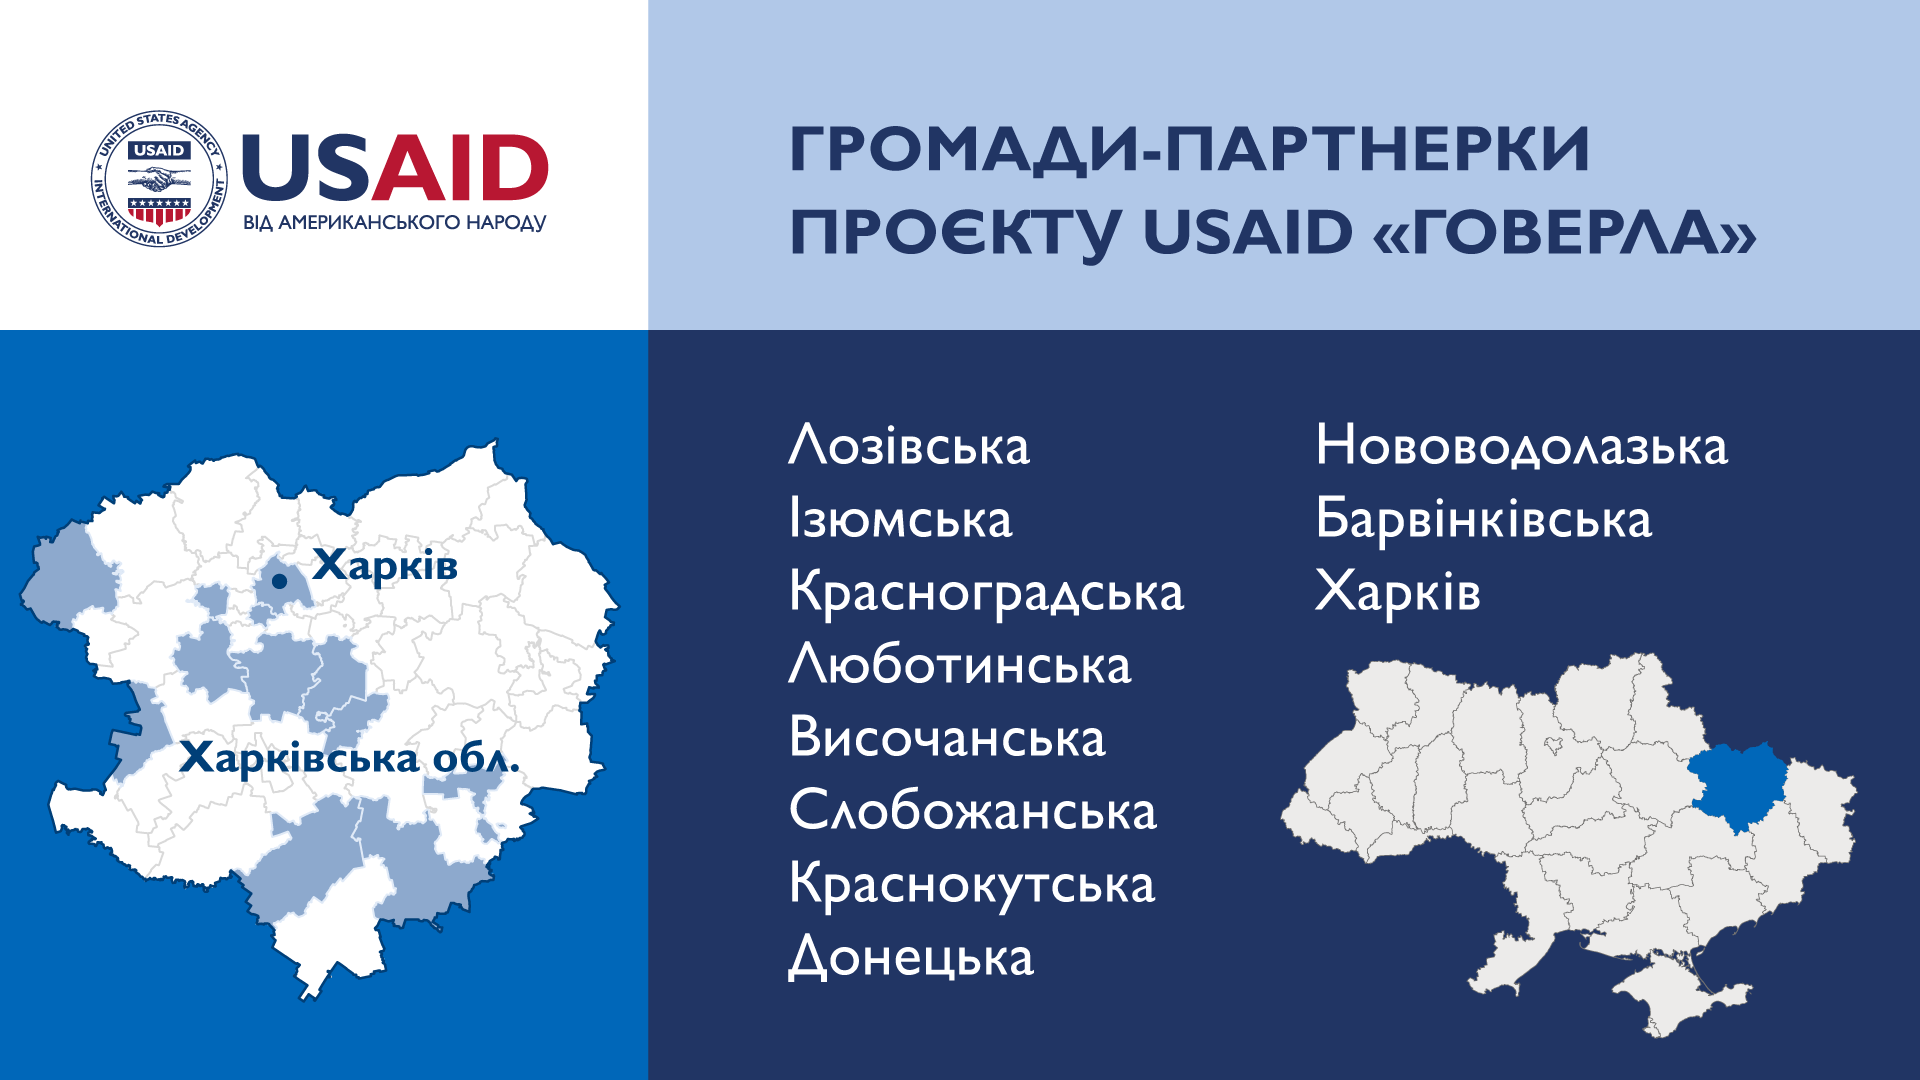 USAID HOVERLA Announces New Partnerships with 18 Communities in Kharkiv and Mykolaiv Oblasts

